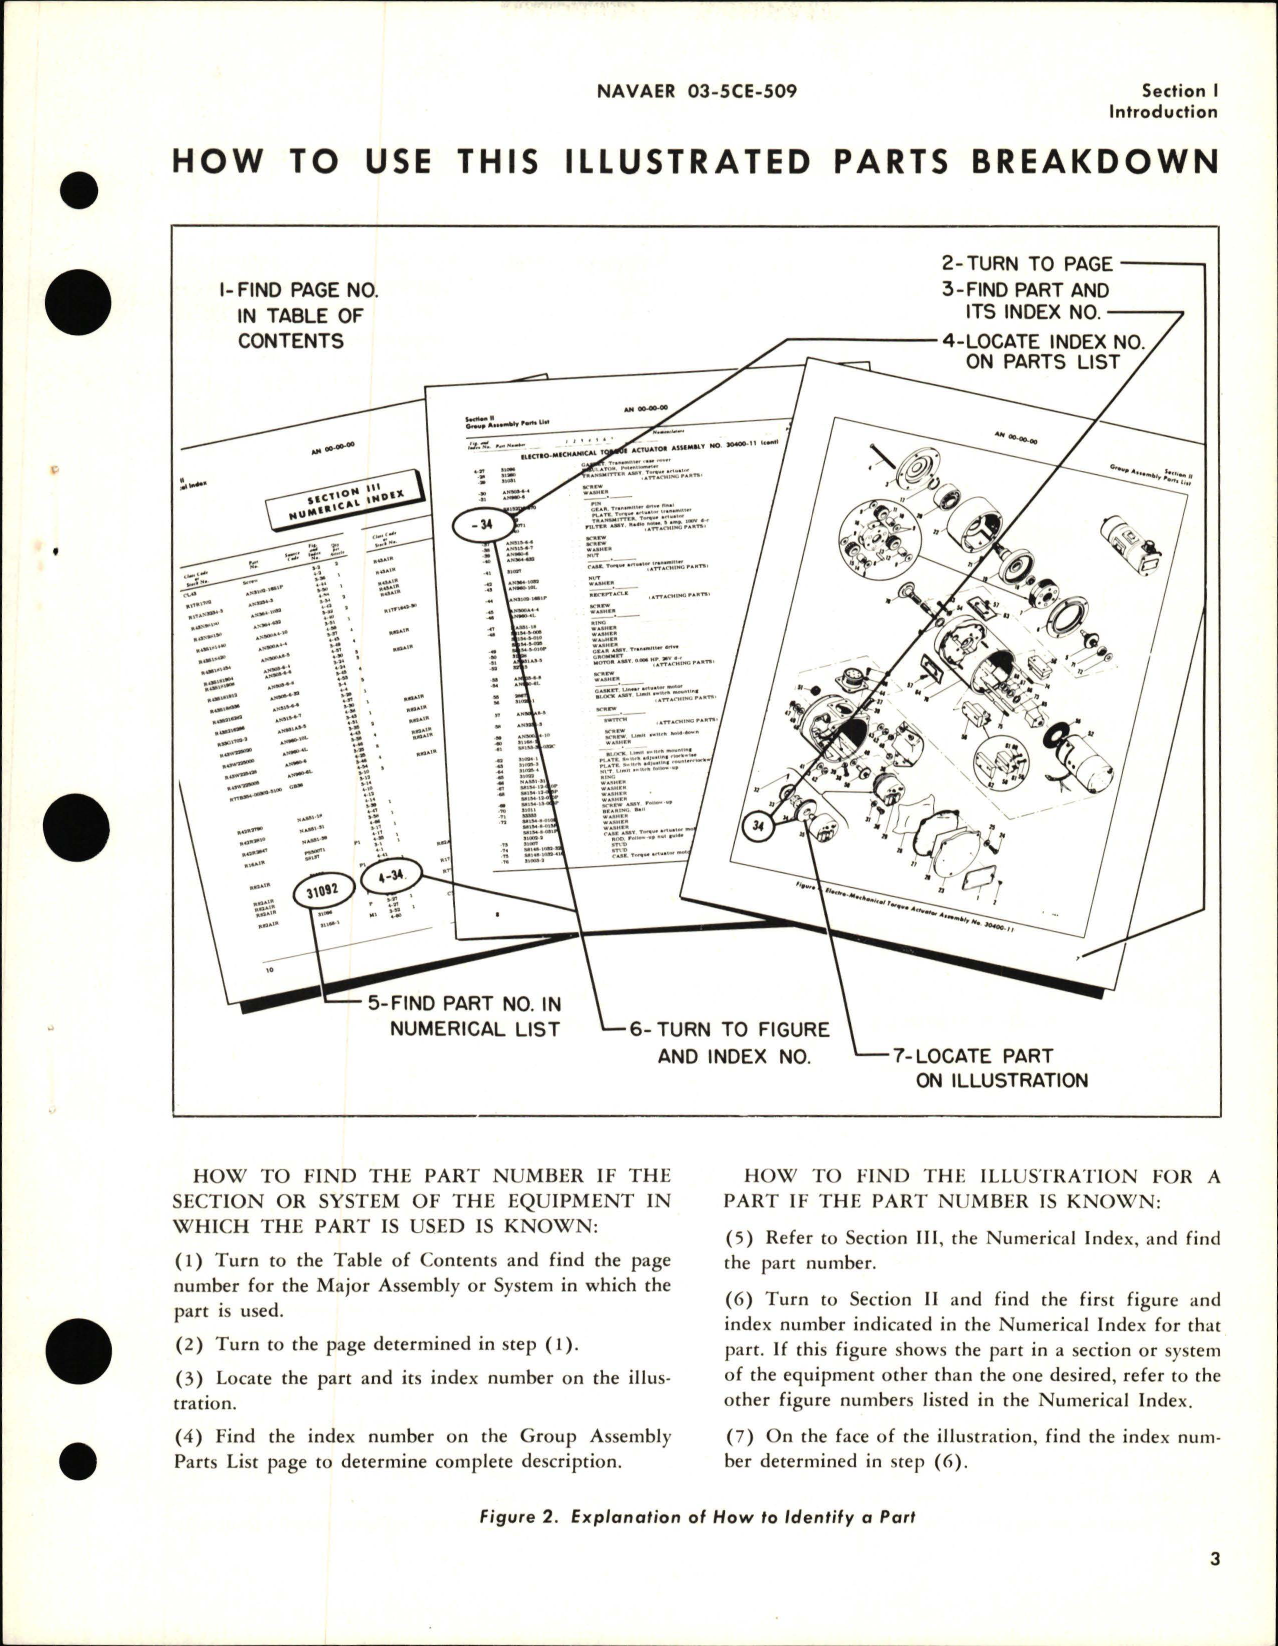 Sample page 5 from AirCorps Library document: Illustrated Parts Breakdown for Cowl Flap Control System - Part 28847-1